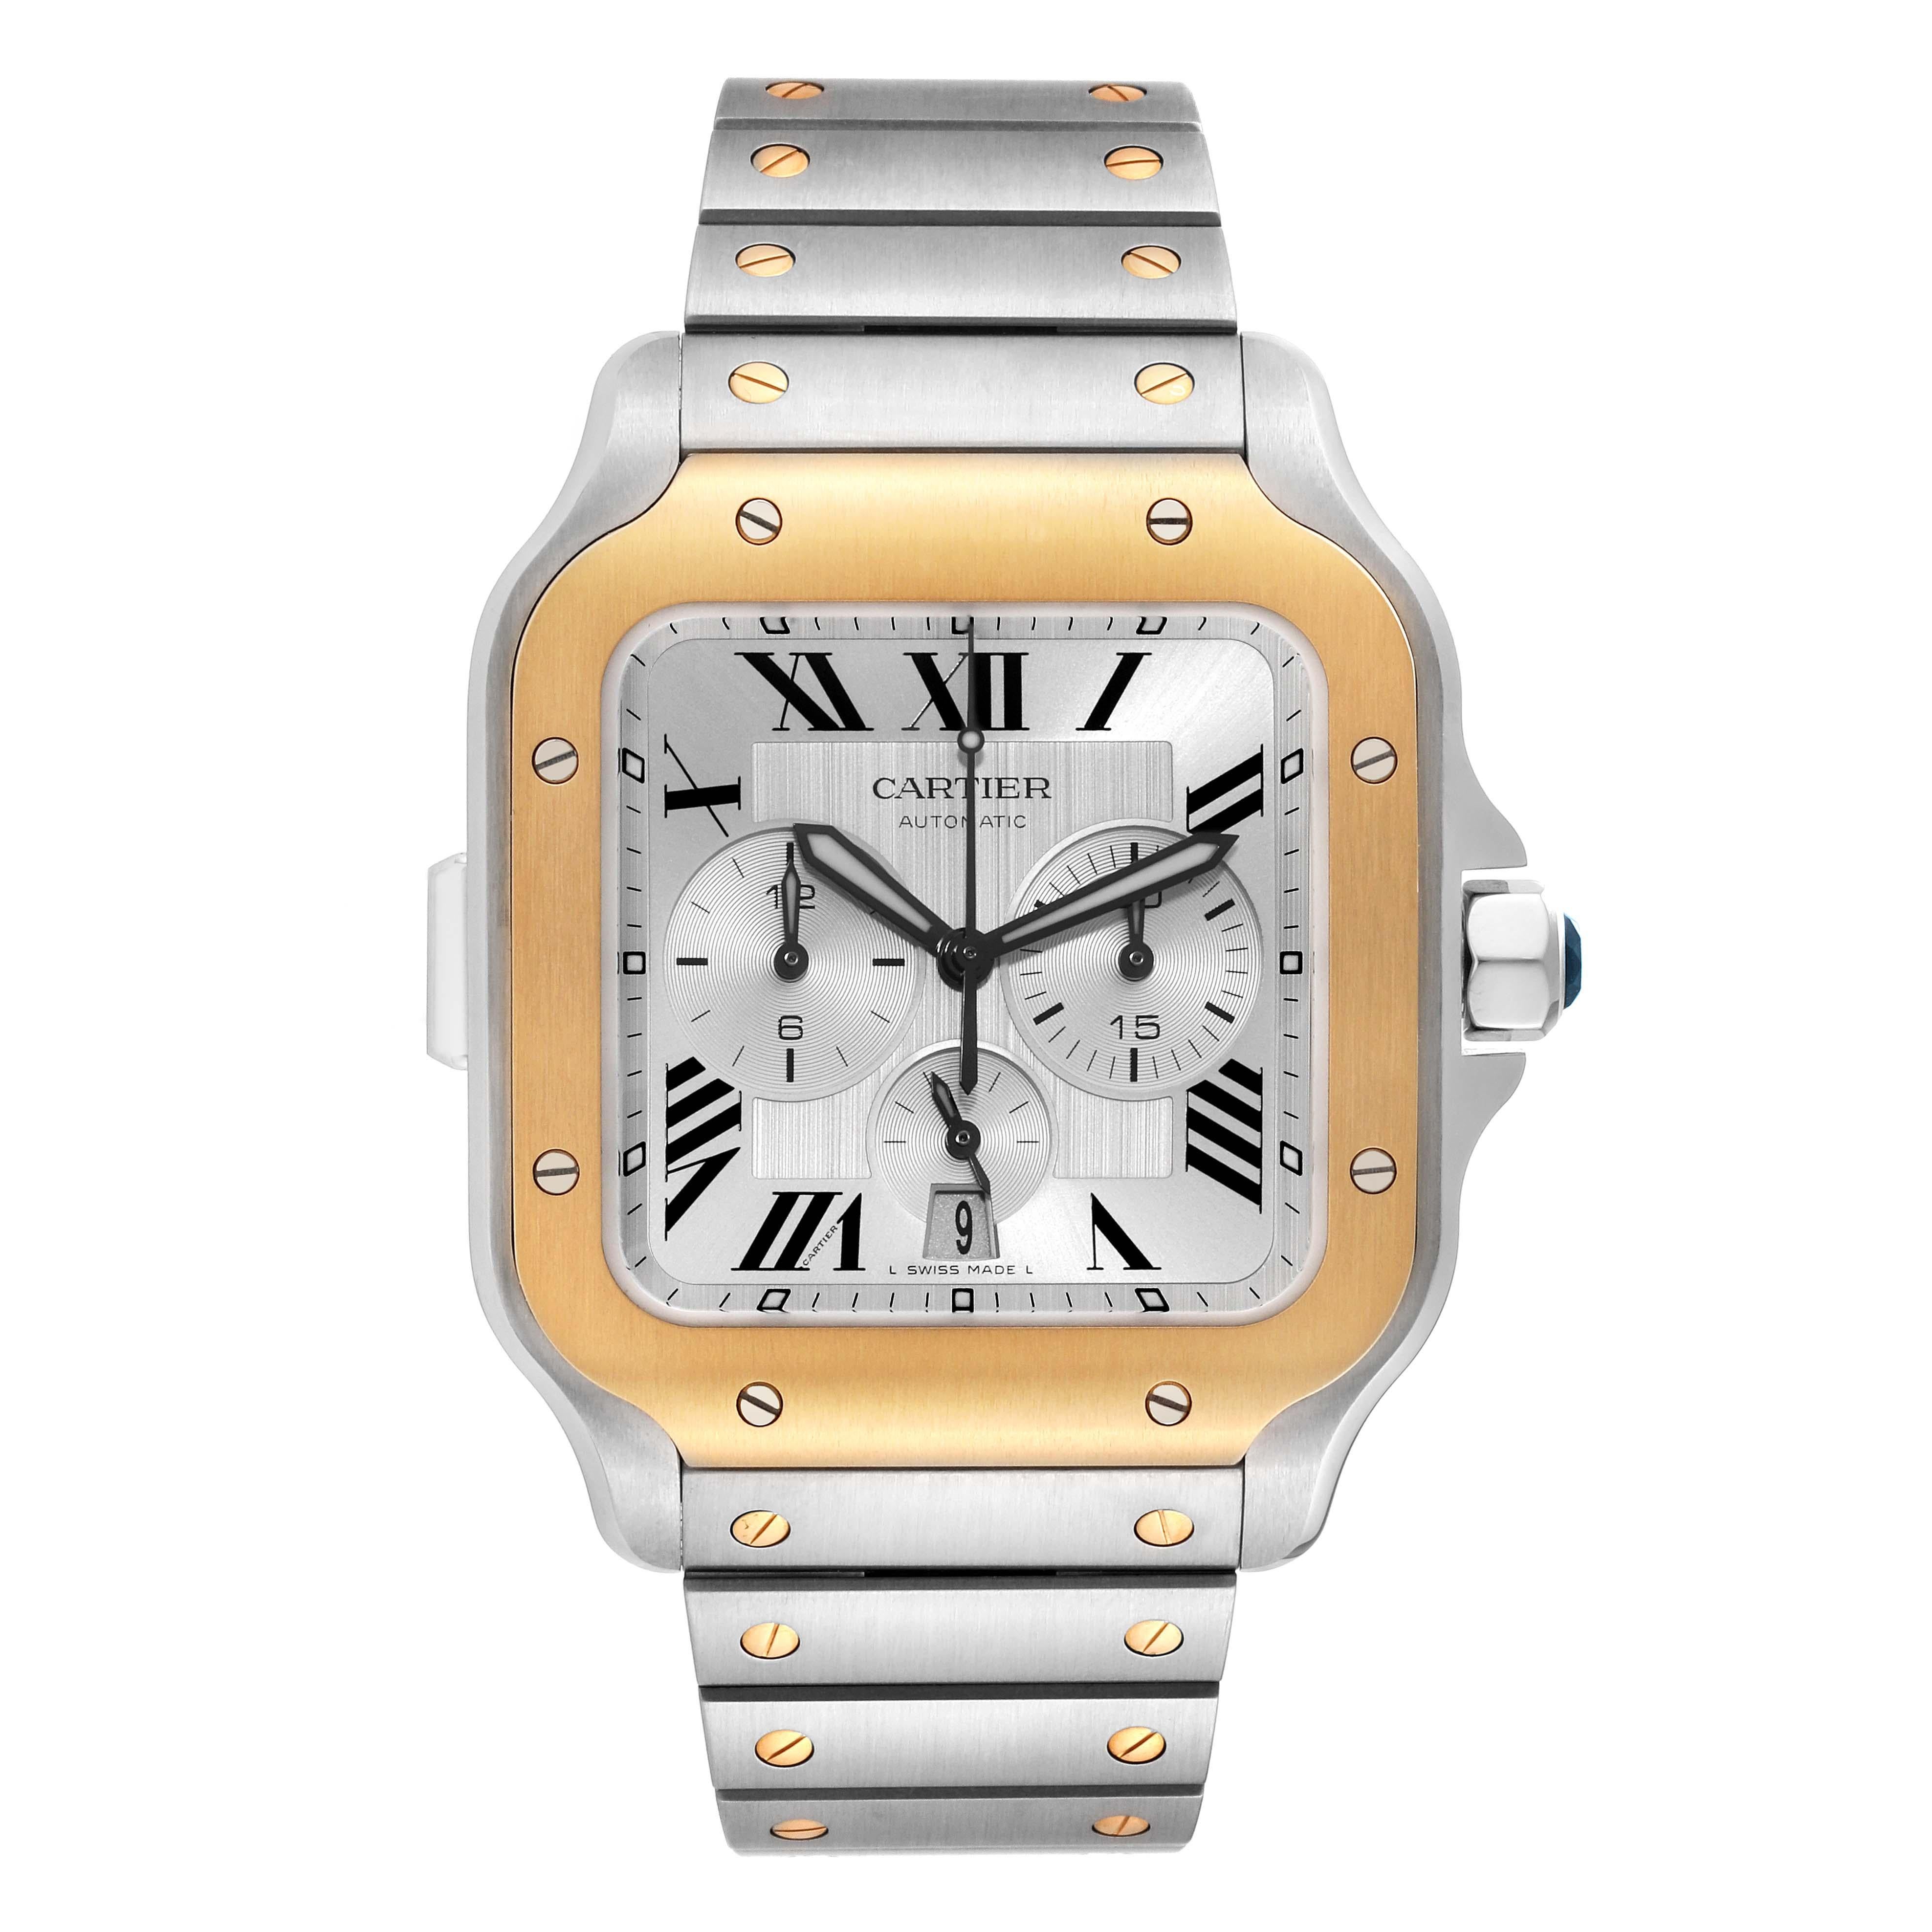 Cartier Santos XL Chronograph Steel Yellow Gold Mens Watch W2SA0008 Box Card. Automatic self-winding chronograph movement, Caliber 1904 CH MC. Stainless steel case 44.9 mm x 51.3 mm. Case thickness: 12.4 mm. Protected octagonal crown set with a